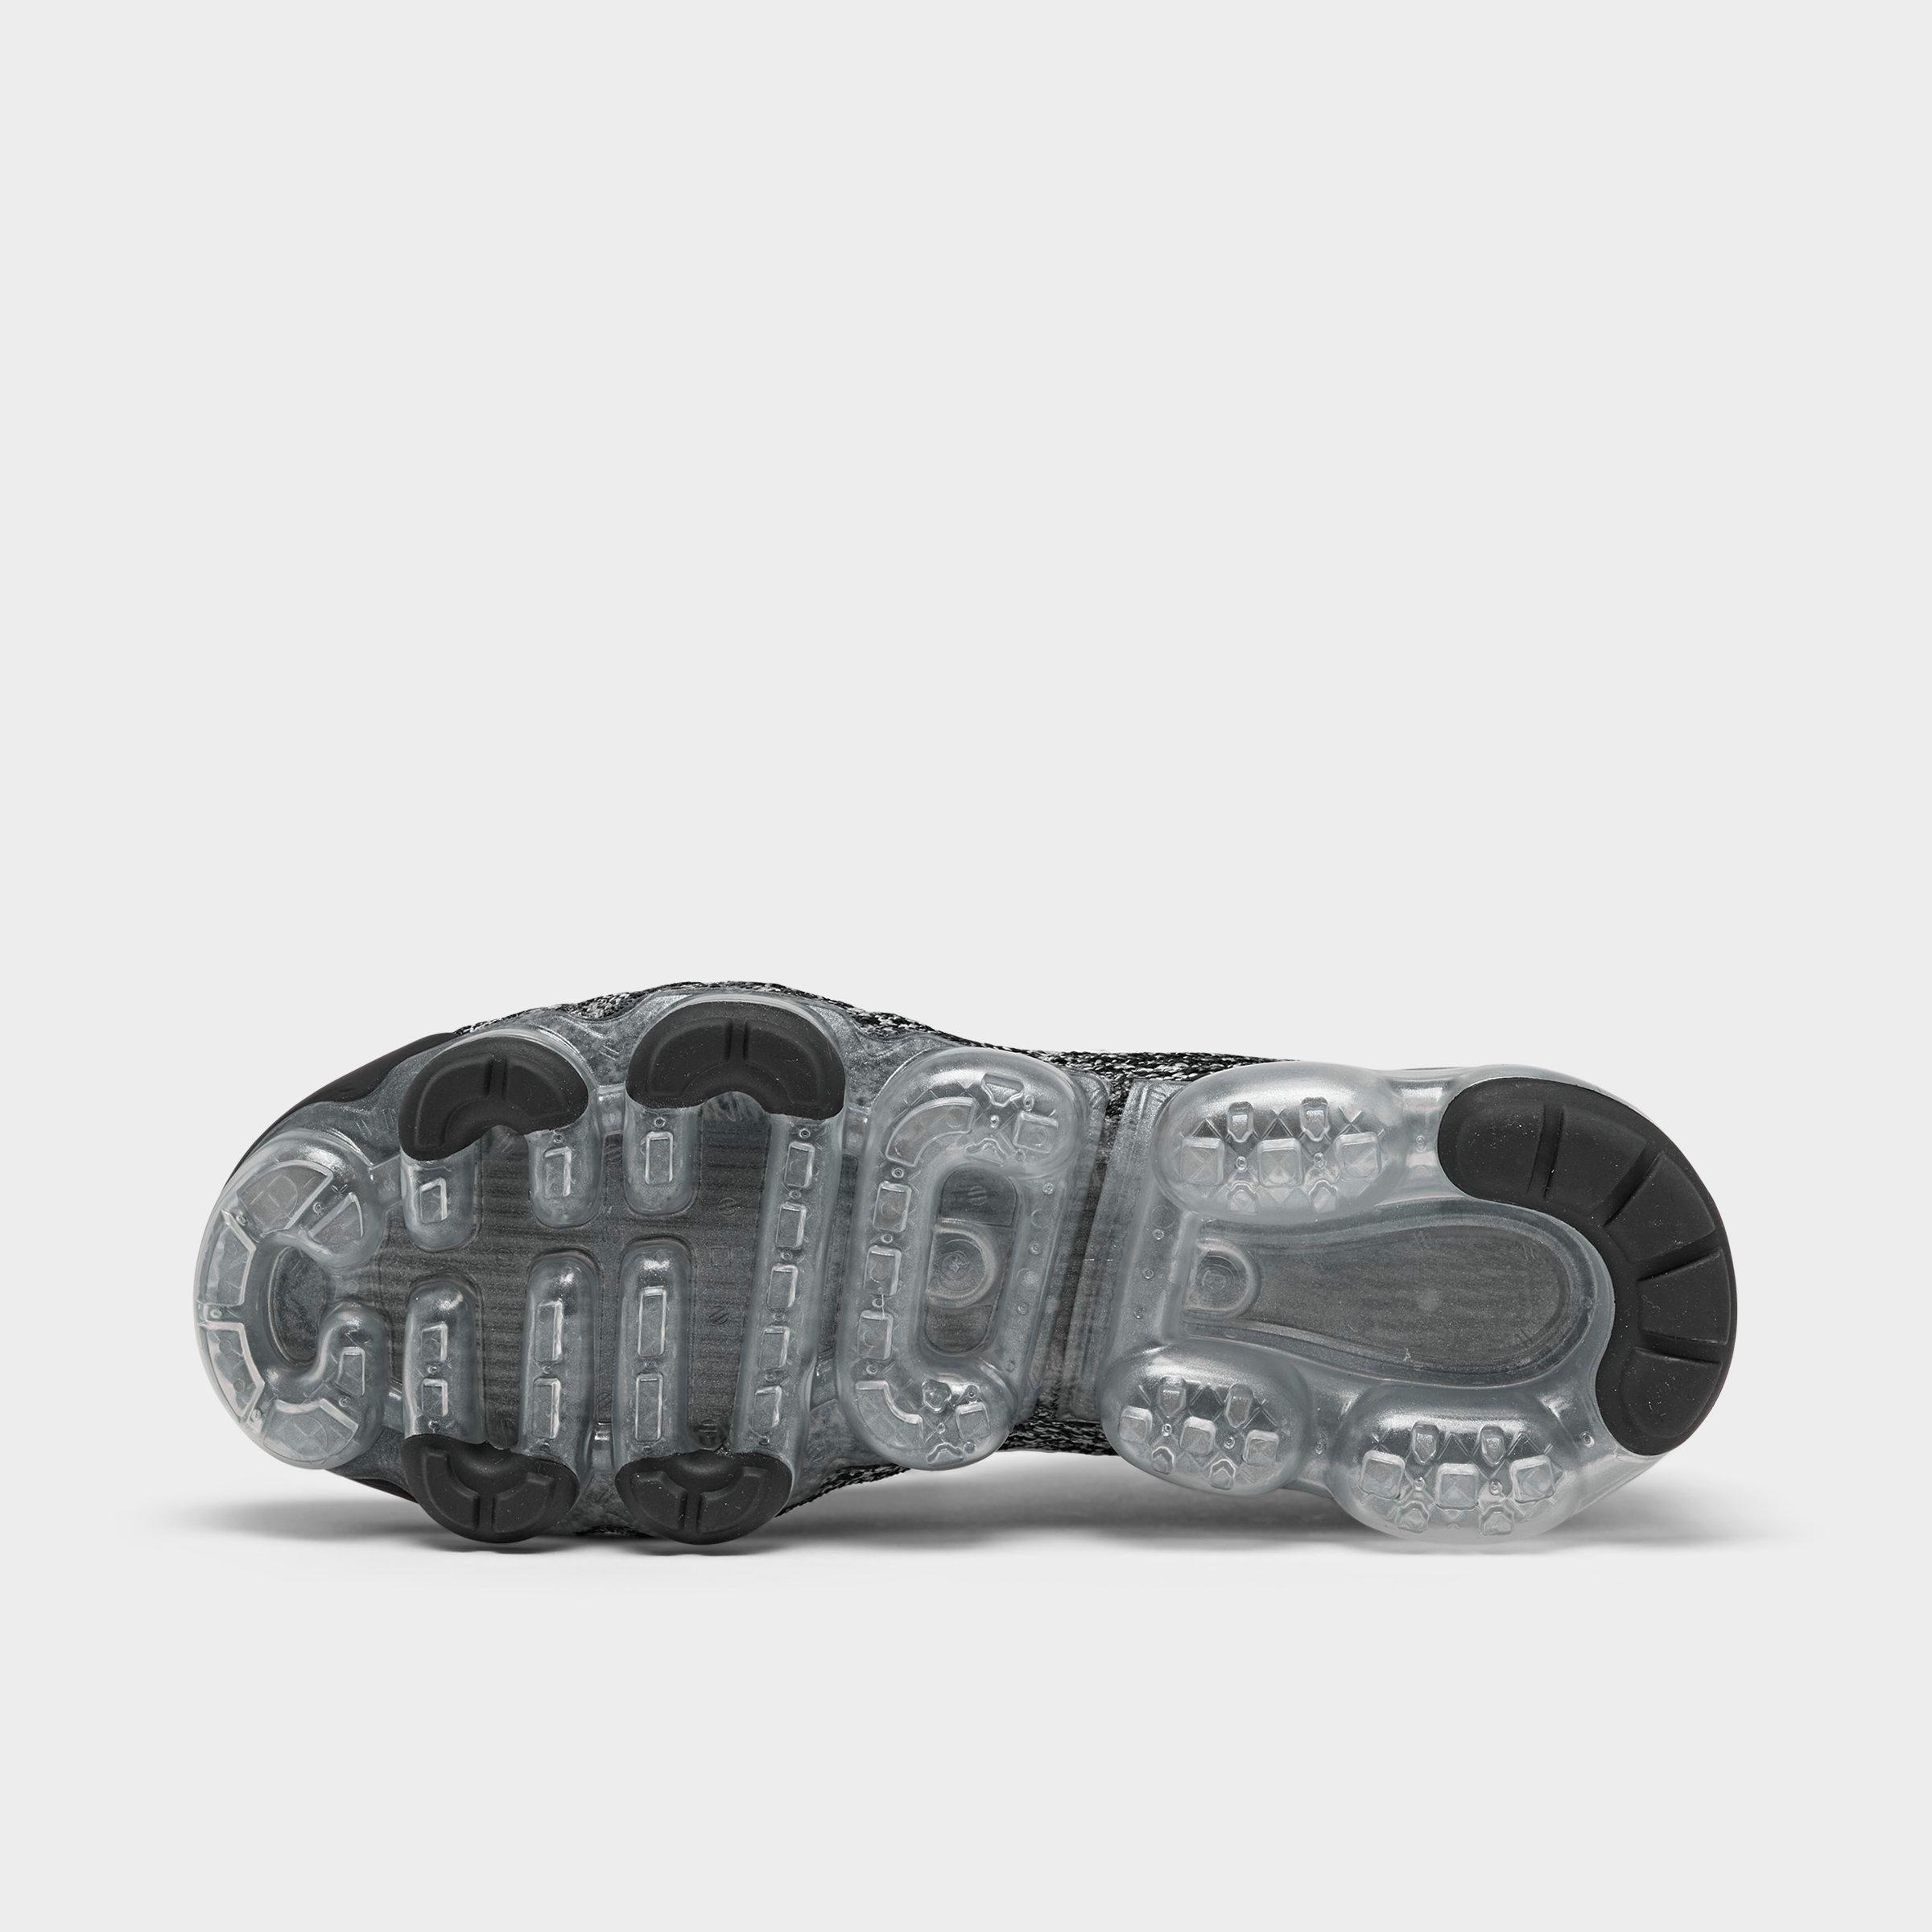 womens vapormax black and white